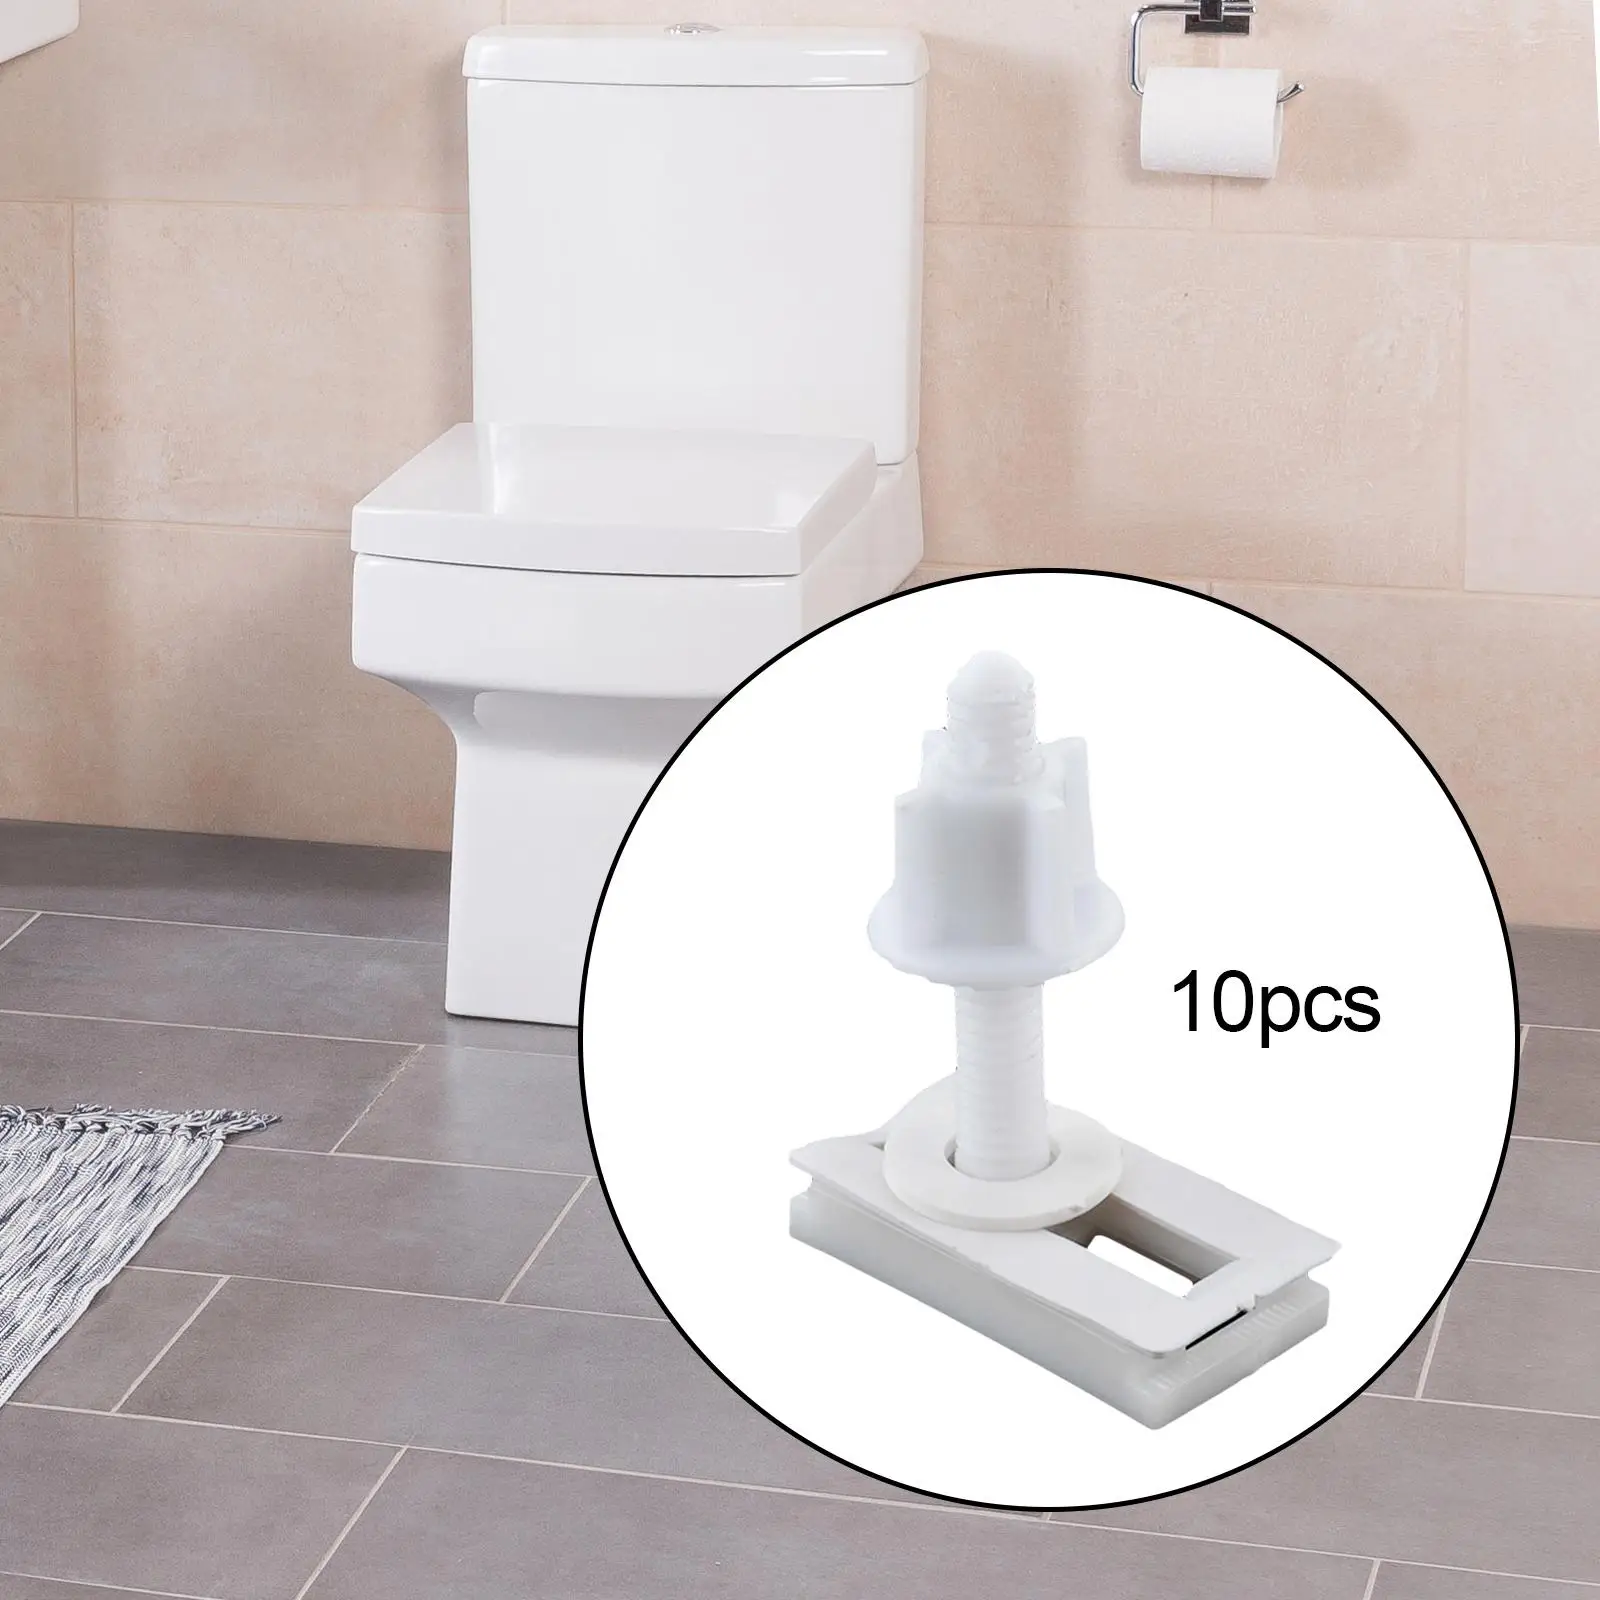 Toilet Seat Hinge Bolt Lightweight Toilet Seat Accessories 10Pcs Practical for Household Office Hotels Bathrooms Public Places